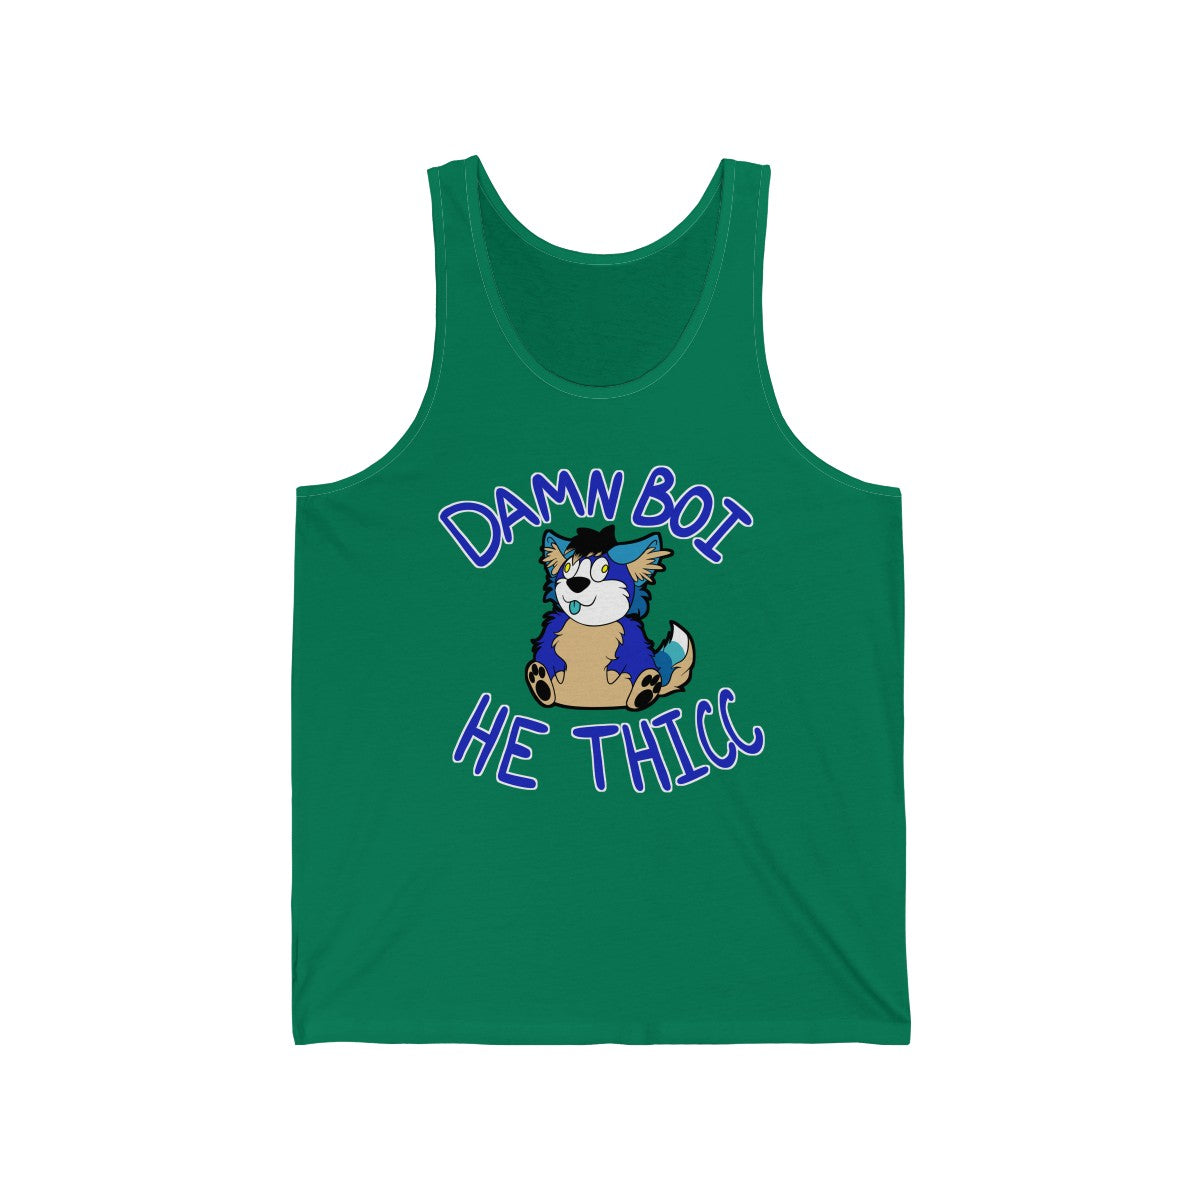 Thicc Boi With Text - Tank Top Tank Top AFLT-Hund The Hound Green XS 